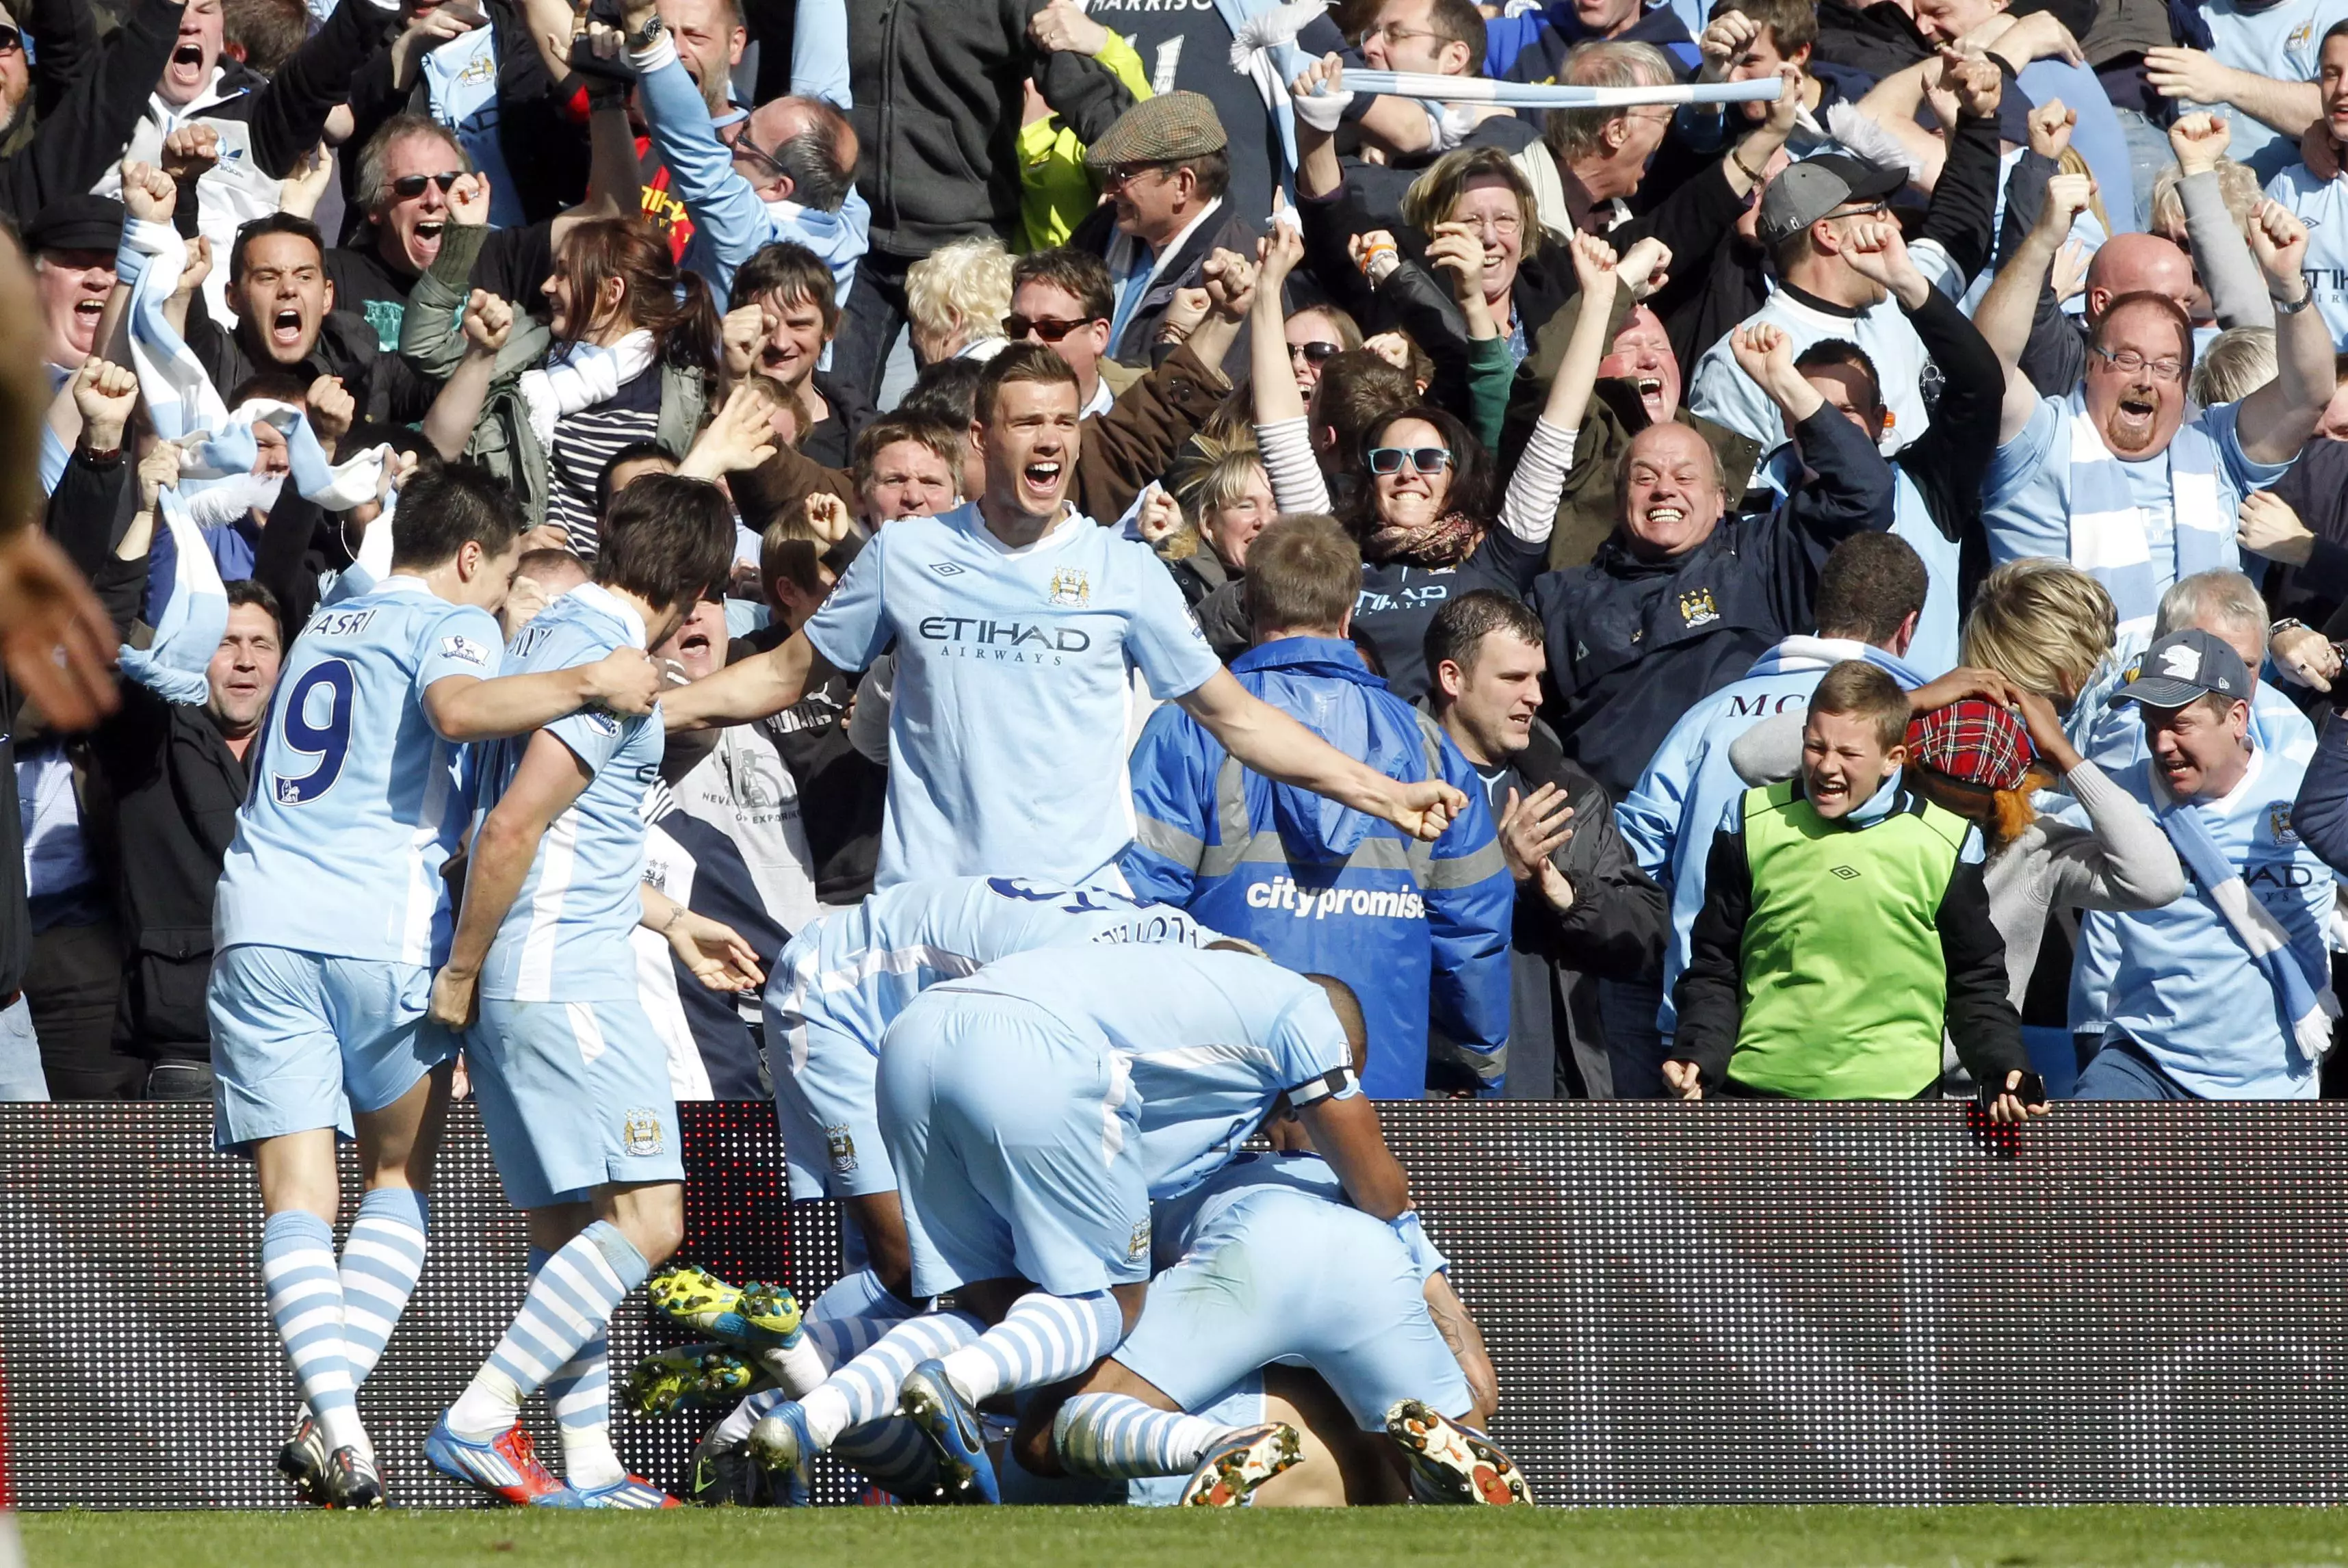 Incredible scenes as City celebrate their title win. Image: PA Images